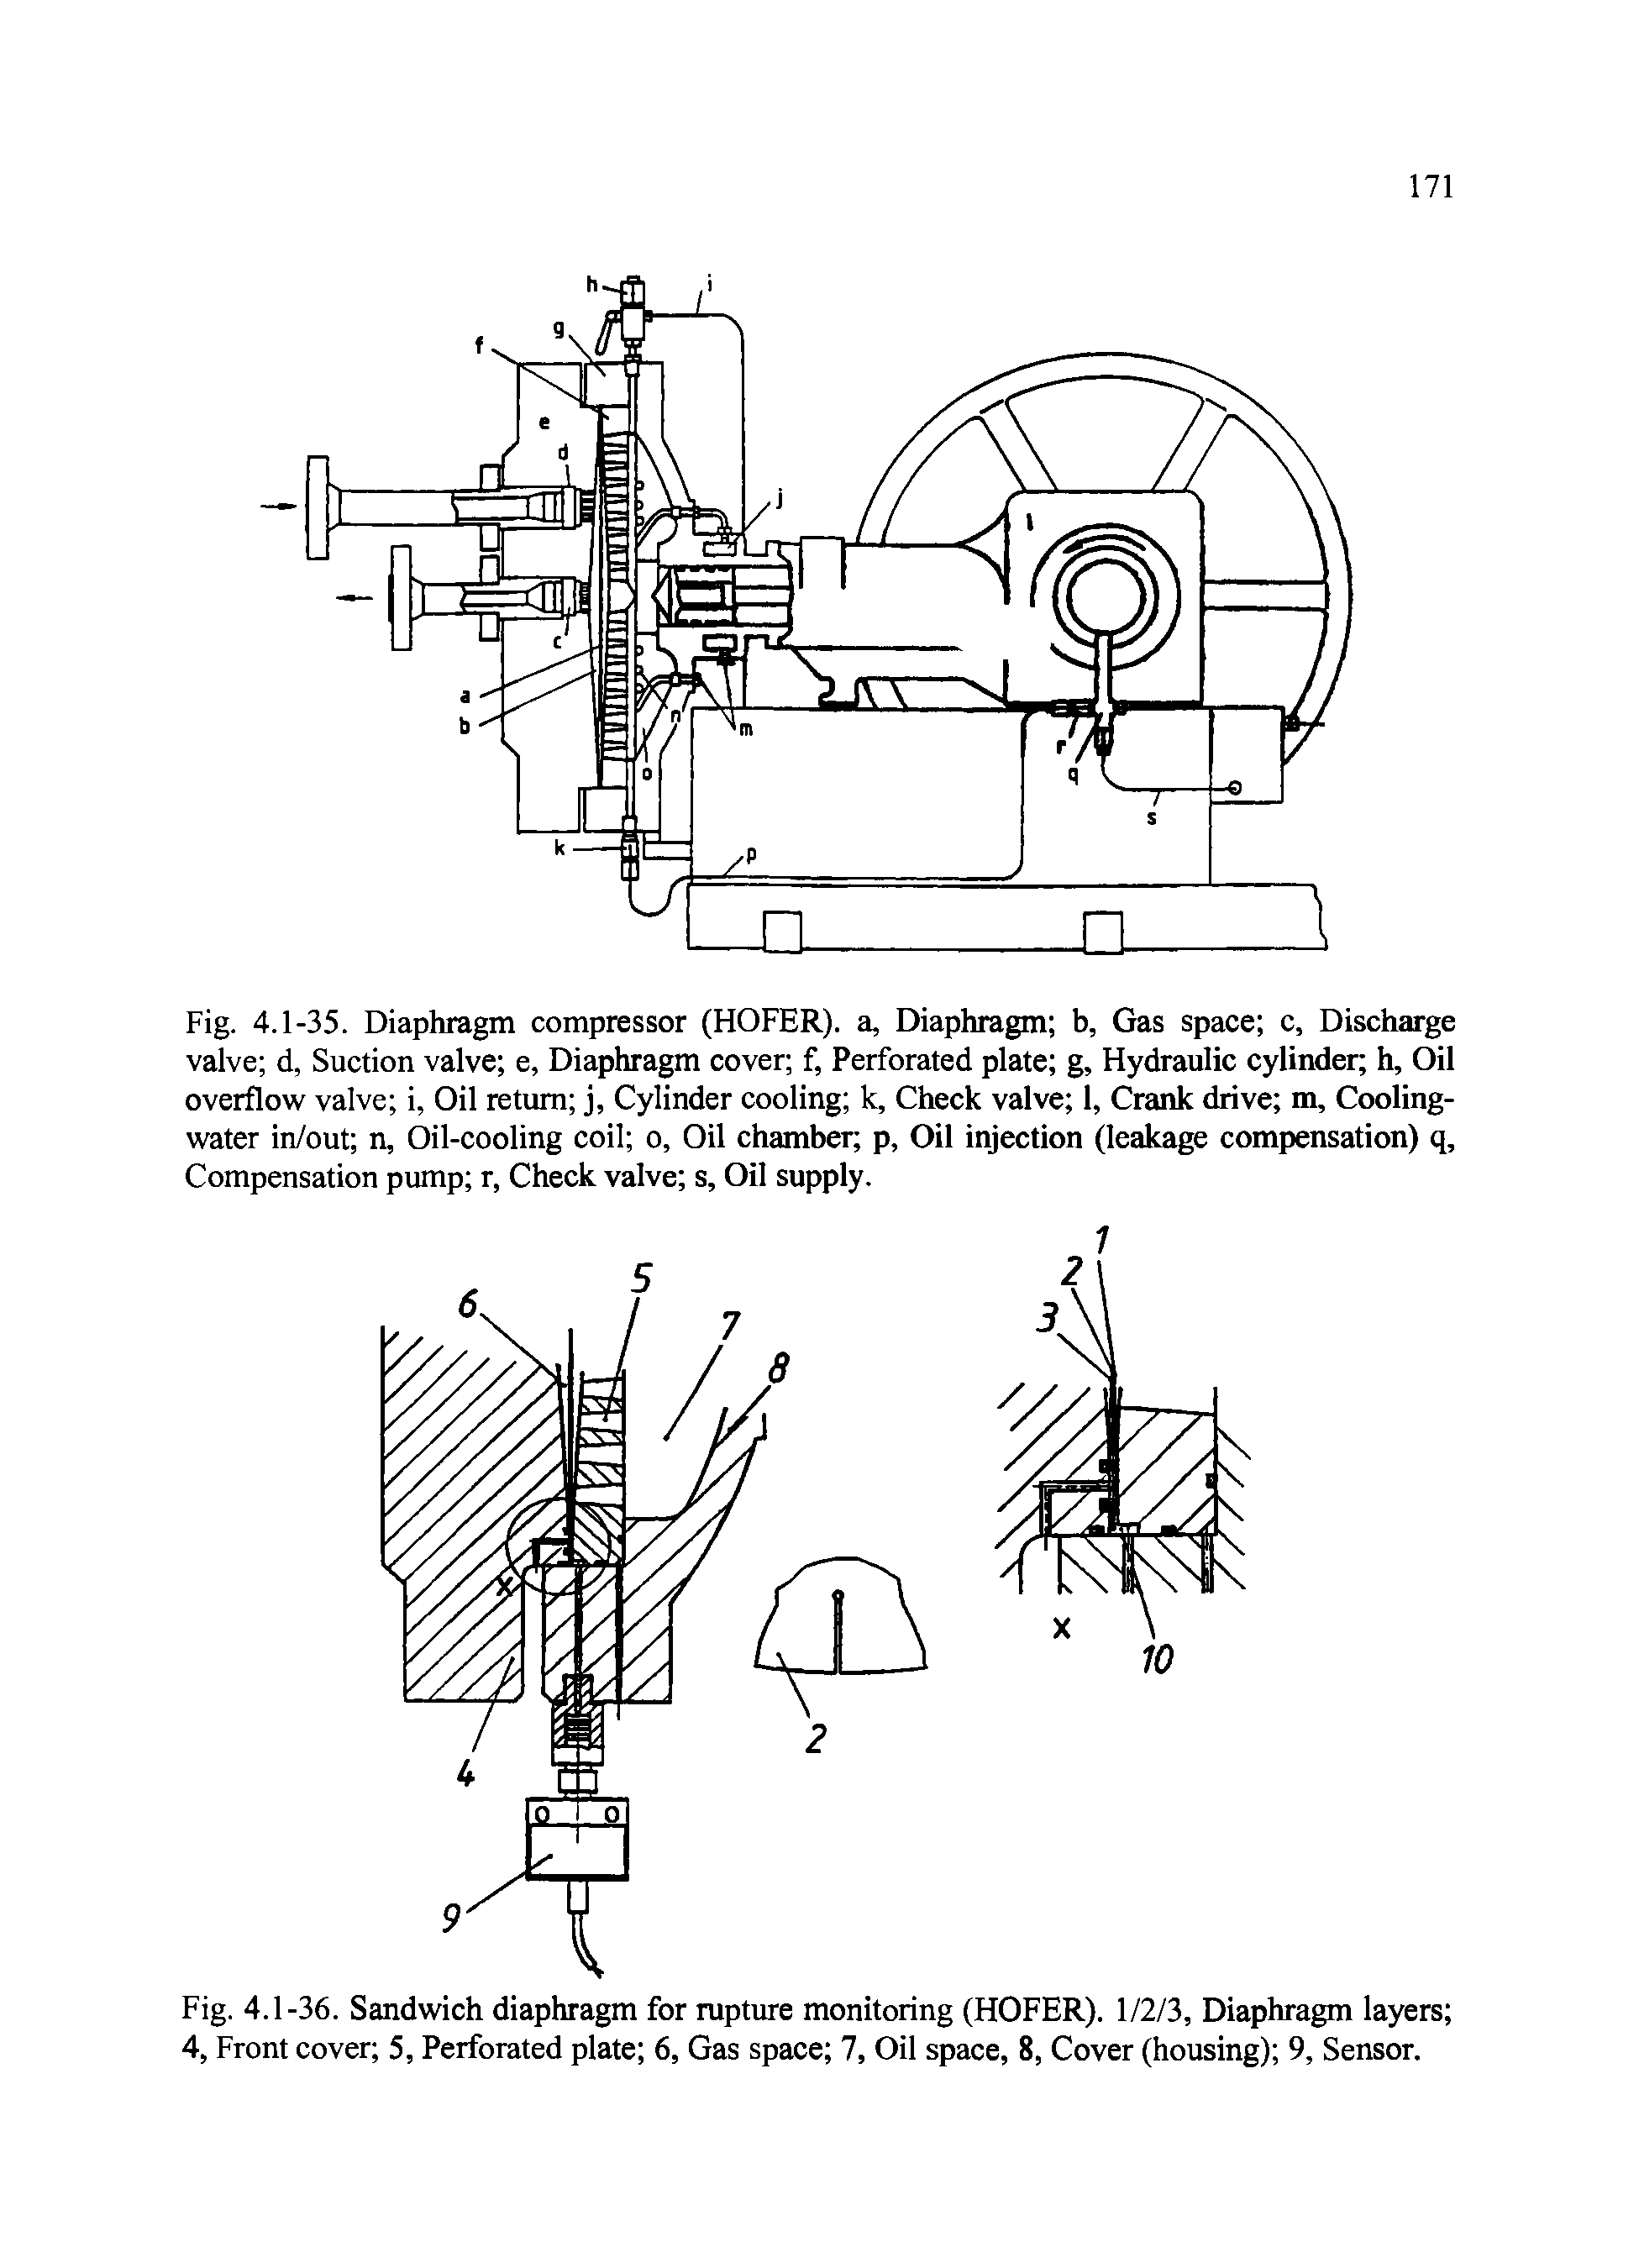 Fig. 4.1-35. Diaphragm compressor (HOFER). a, Diaphragm b, Gas space c, Discharge valve d, Suction valve e, Diaphragm cover f, Perforated plate g, Hydraulic cylinder h, Oil overflow valve i, Oil return j, Cylinder cooling k, Check valve 1, Crank drive m, Cooling-water in/out n, Oil-cooling coil o, Oil chamber p, Oil injection (leakage compensation) q, Compensation pump r, Check valve s, Oil supply.